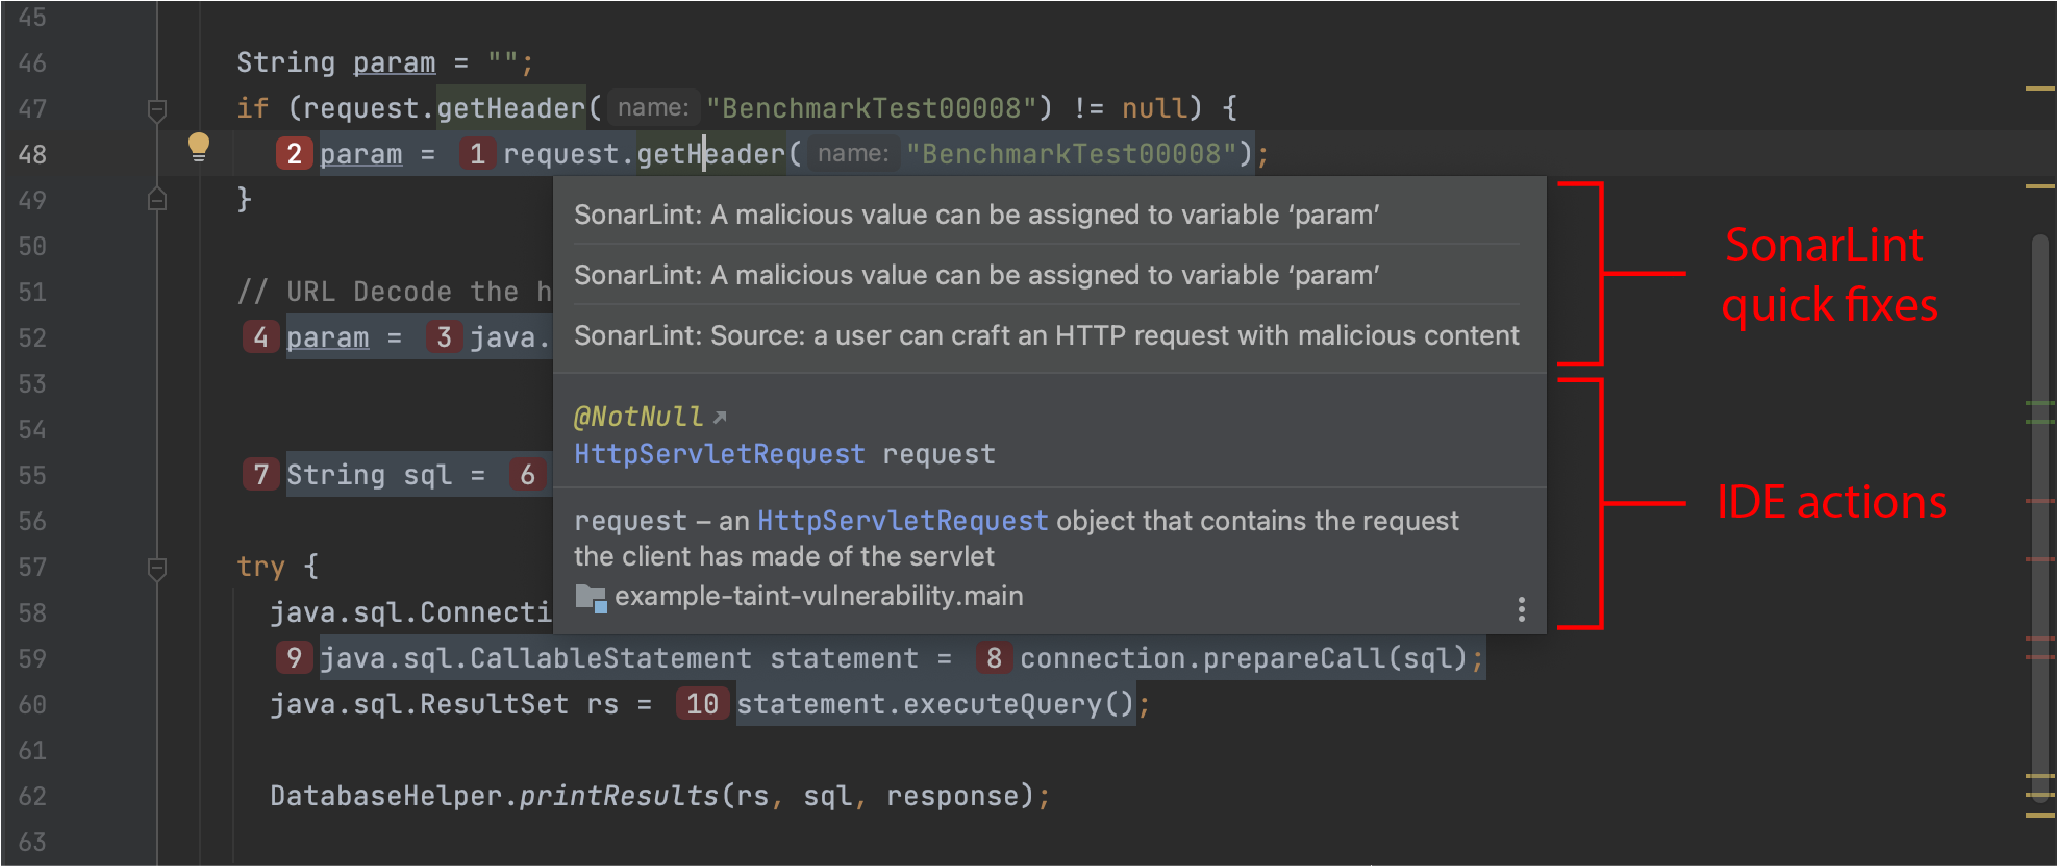 SonarLint's quick fix actions are highlighted as something different than an IDE action.